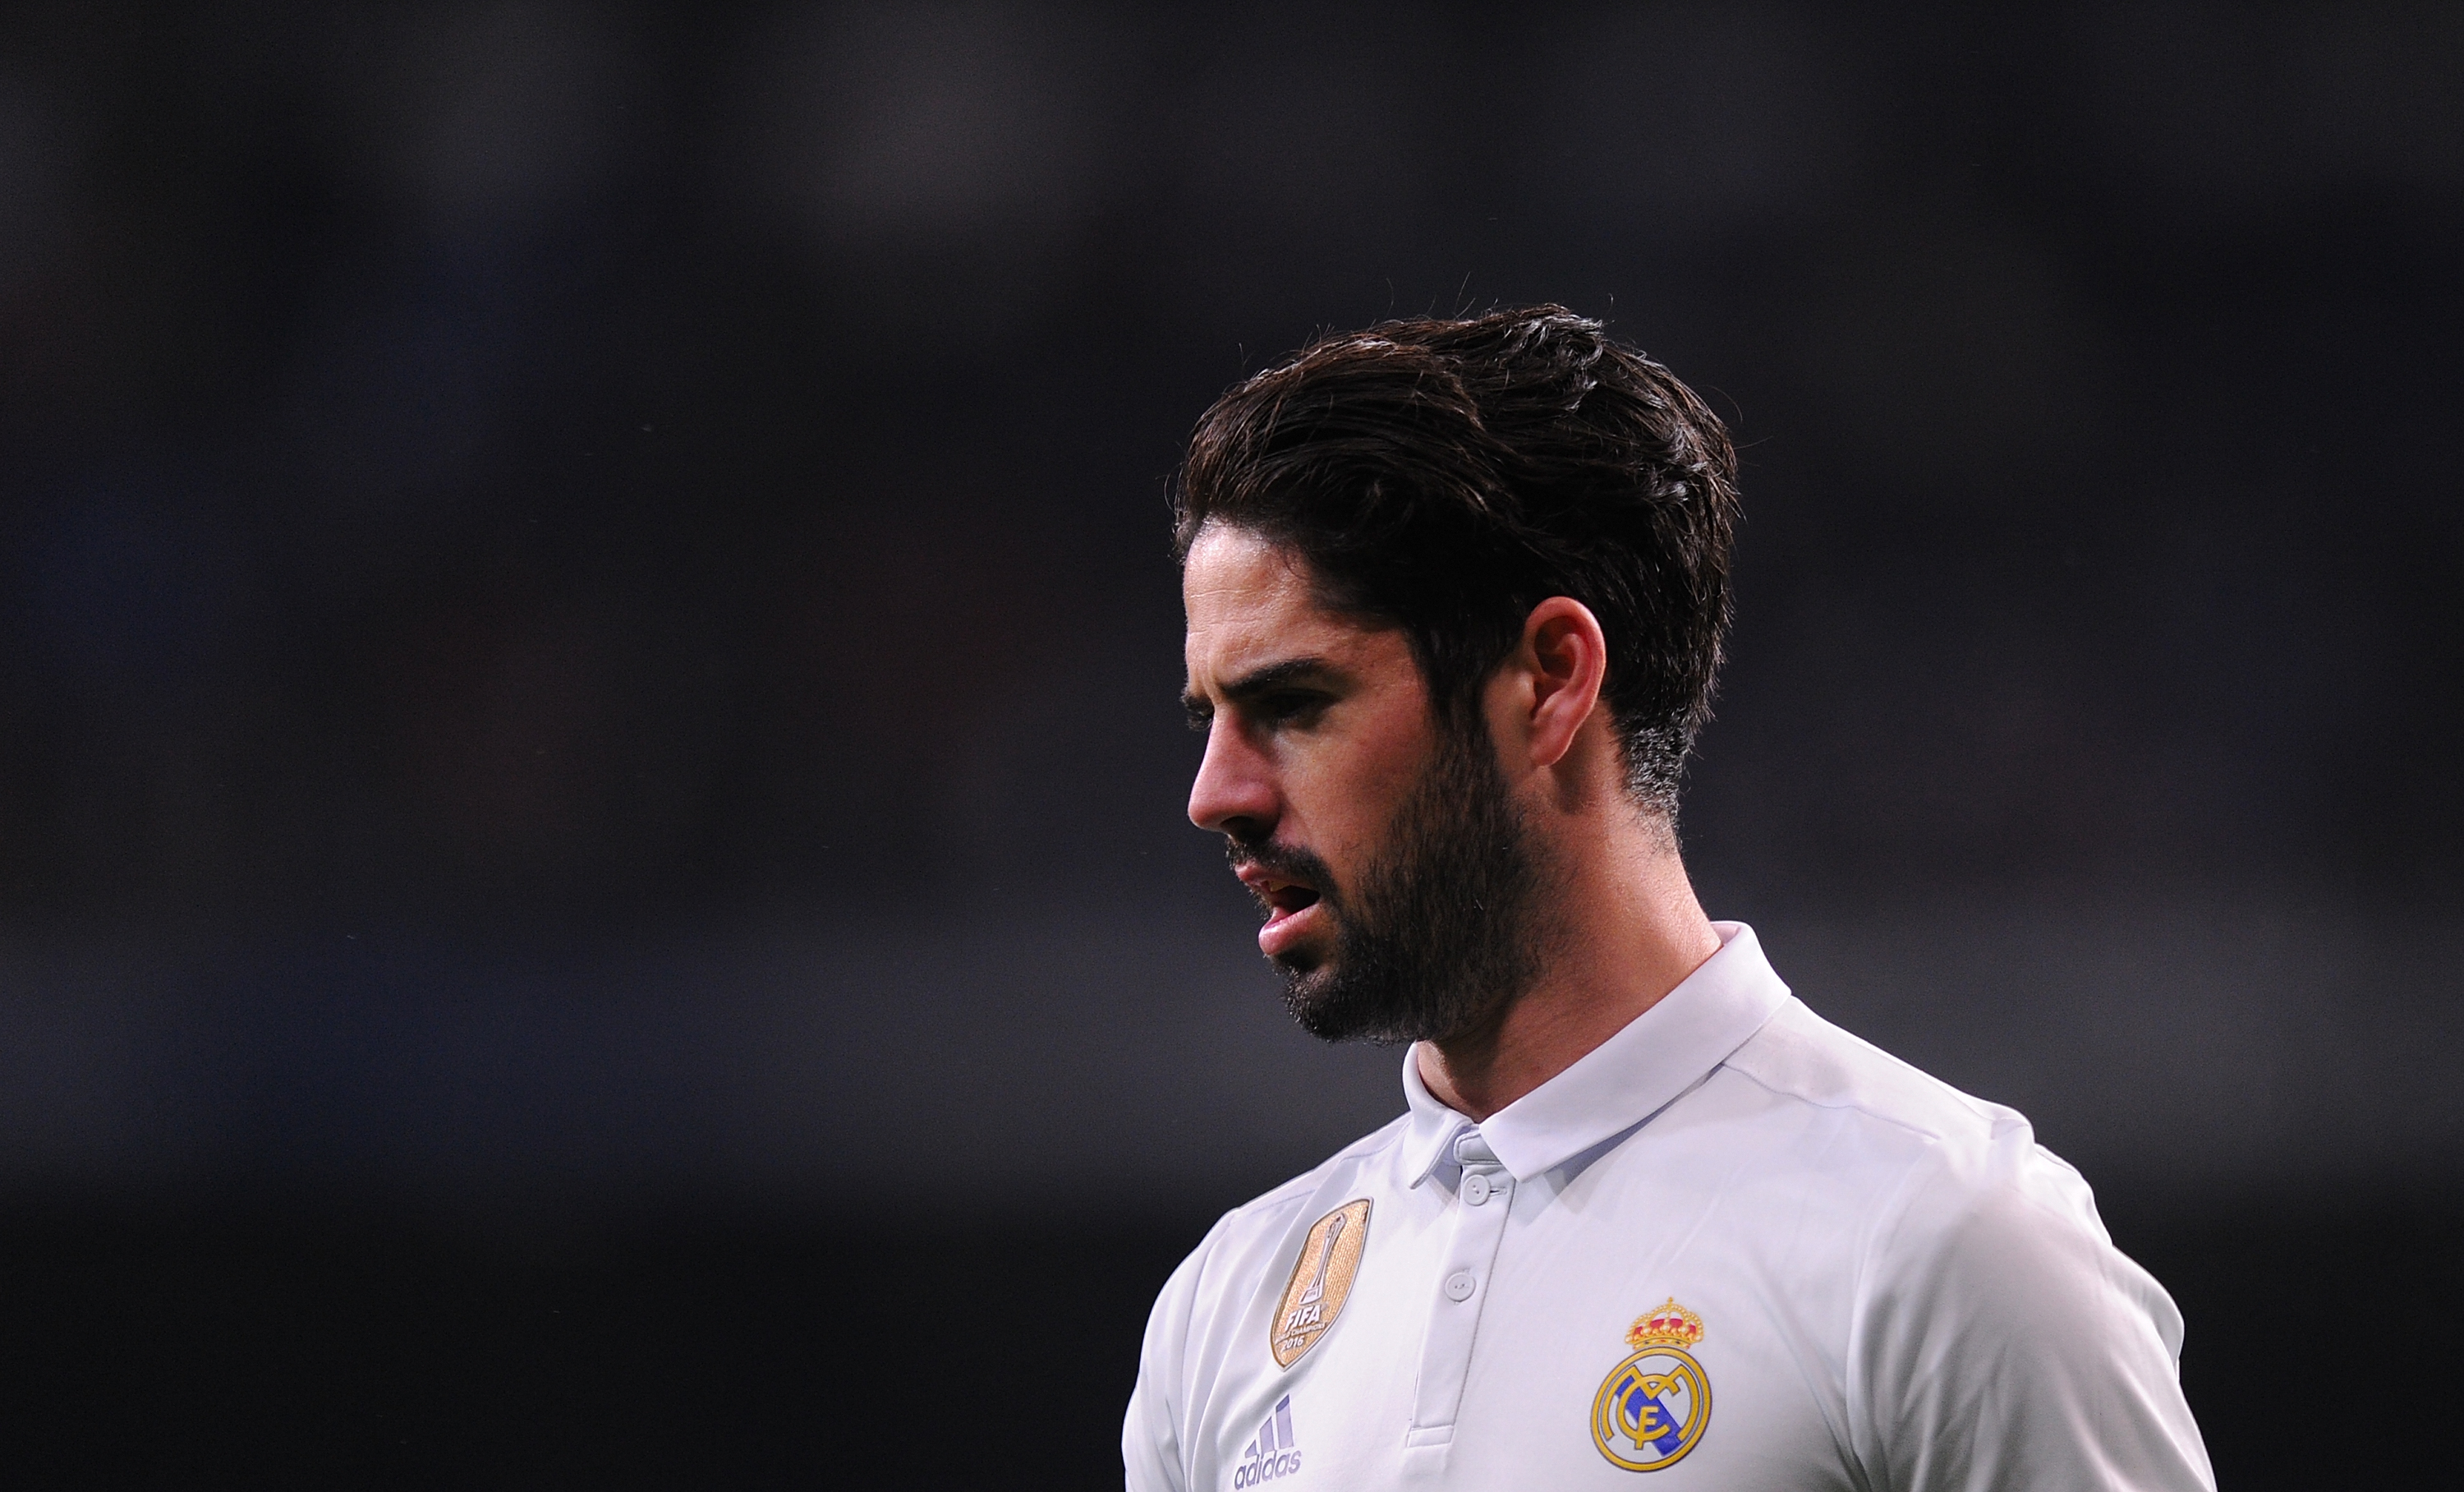 MADRID, SPAIN - JANUARY 29:  MADRID, SPAIN JANUARY 29:  Isco Alarcon of Real Madrid looks on during the La Liga match between Real Madrid CF and Real Sociedad de Futbol at the Bernabeu on January 29, 2017 in Madrid, Spain.  (Photo by Denis Doyle/Getty Images)